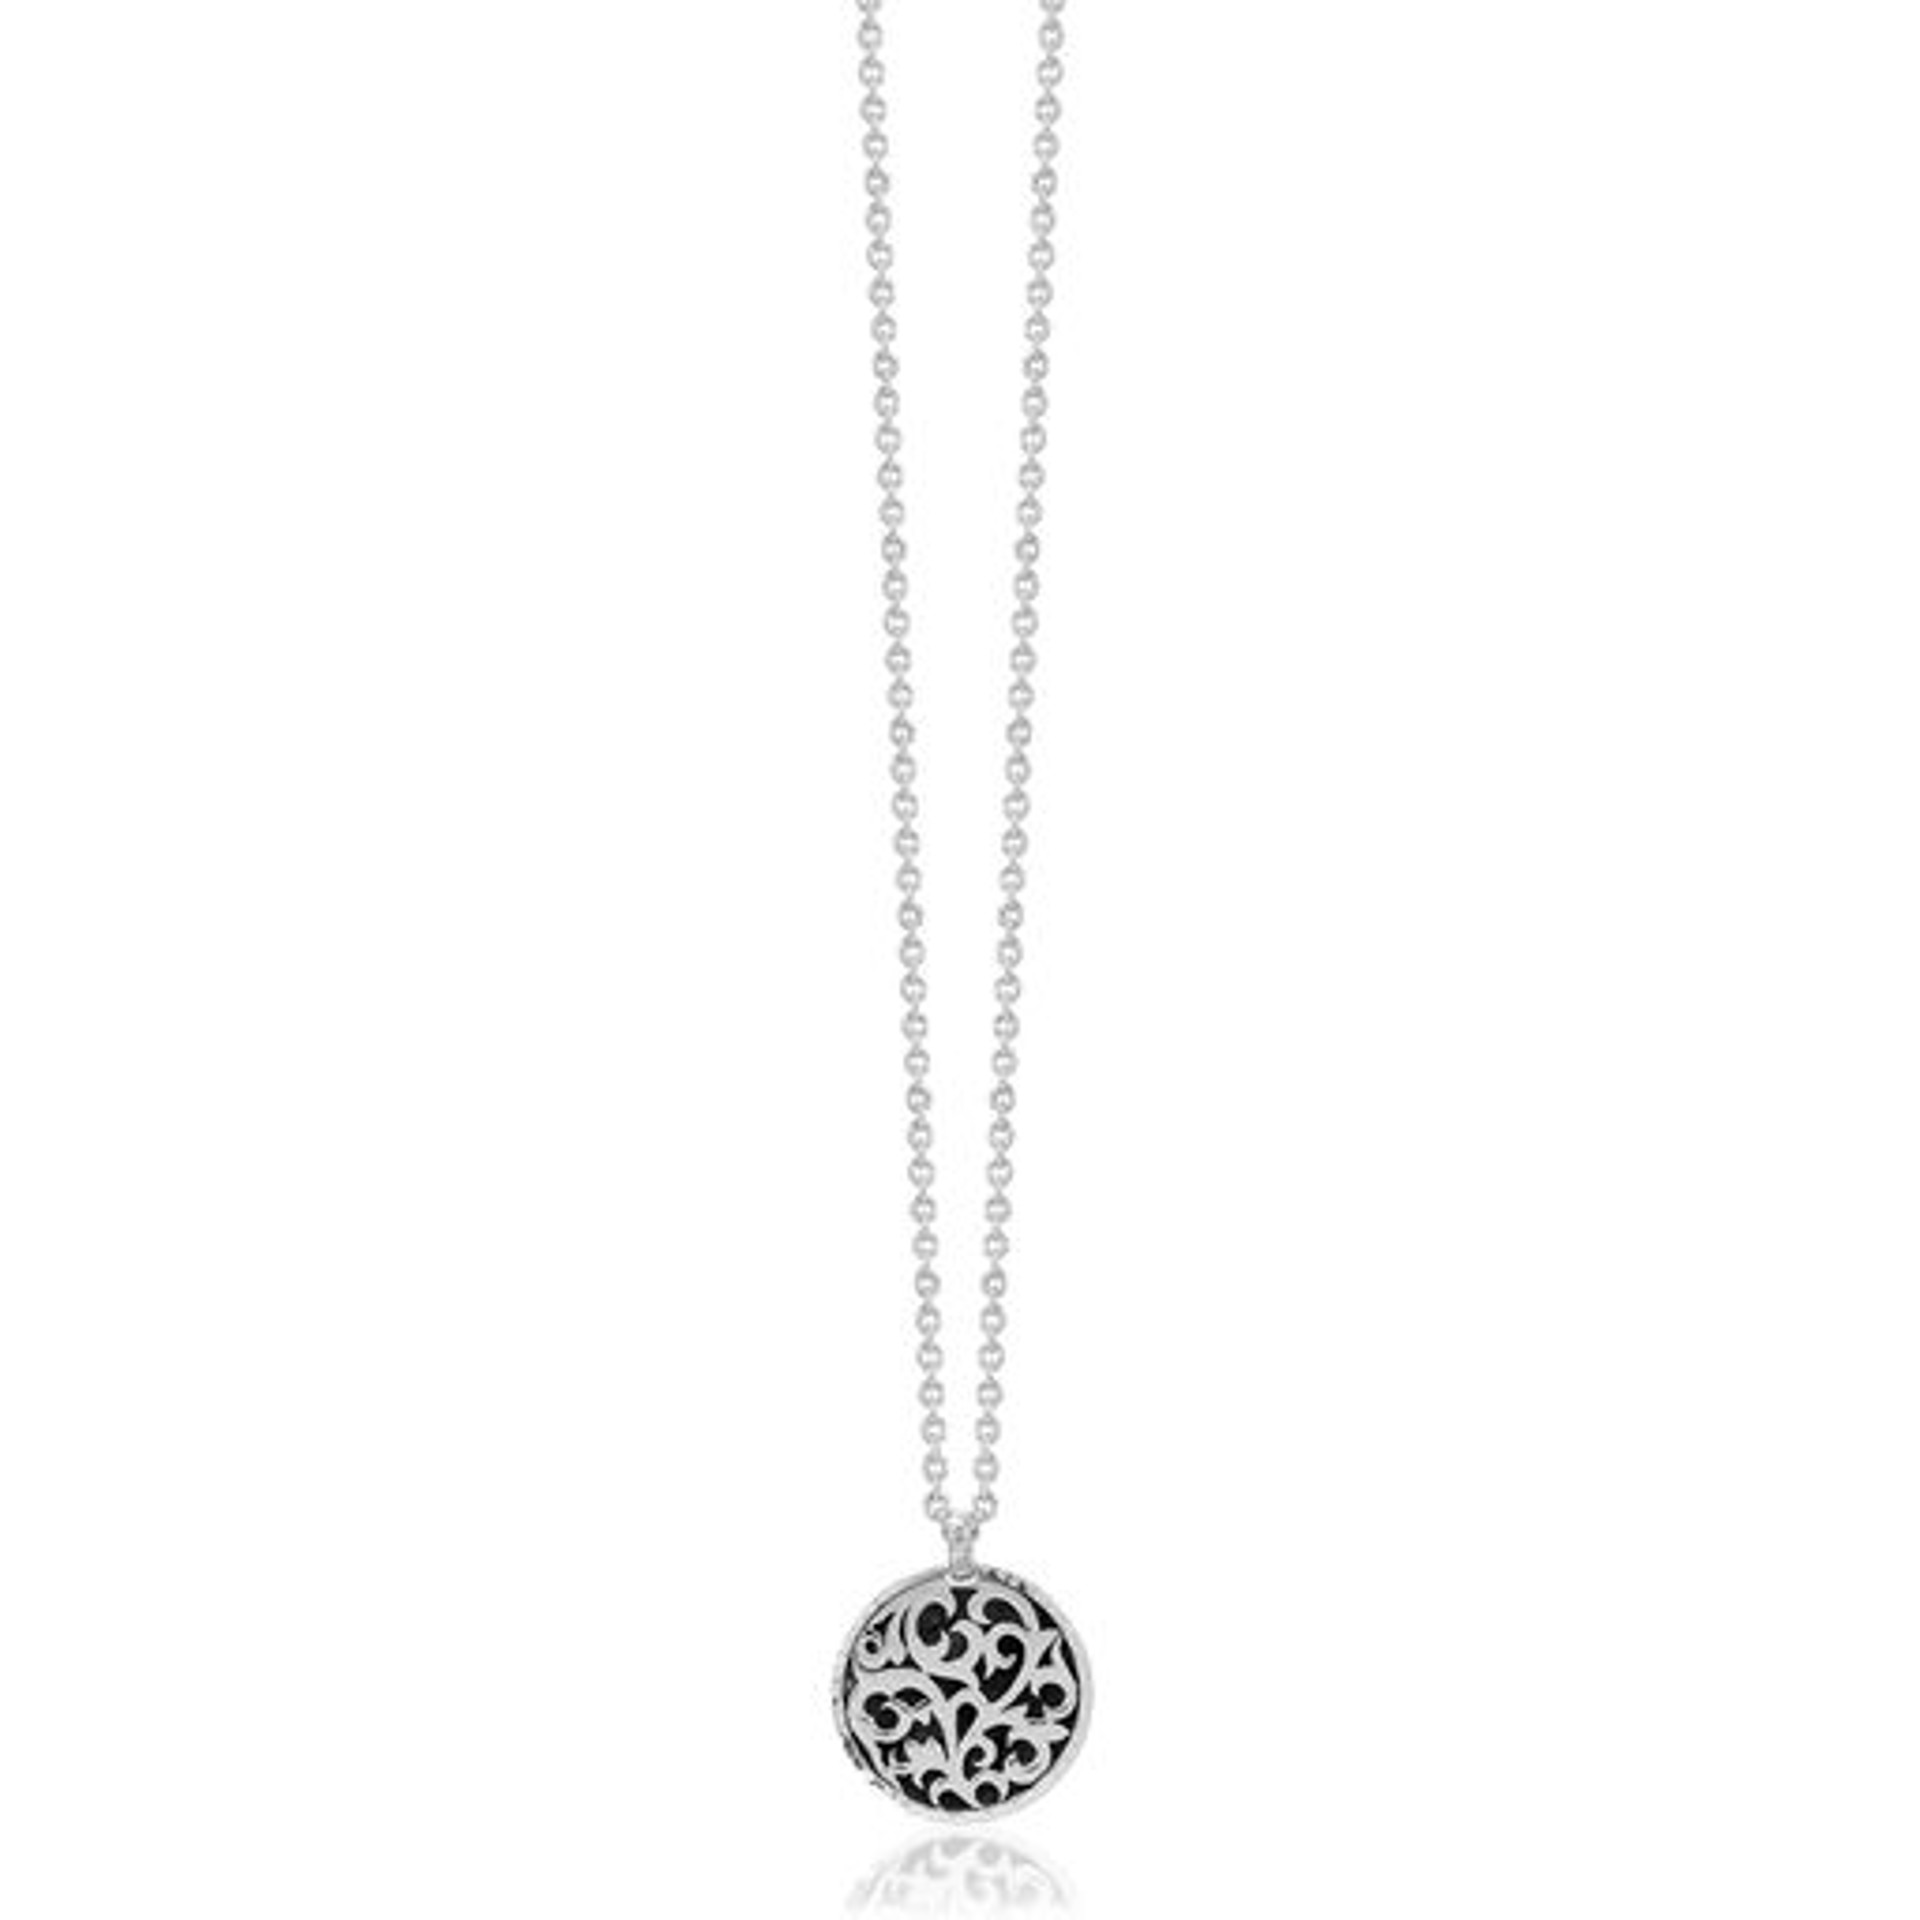 7019 Men's Circle Silver Necklace by Lois Hill